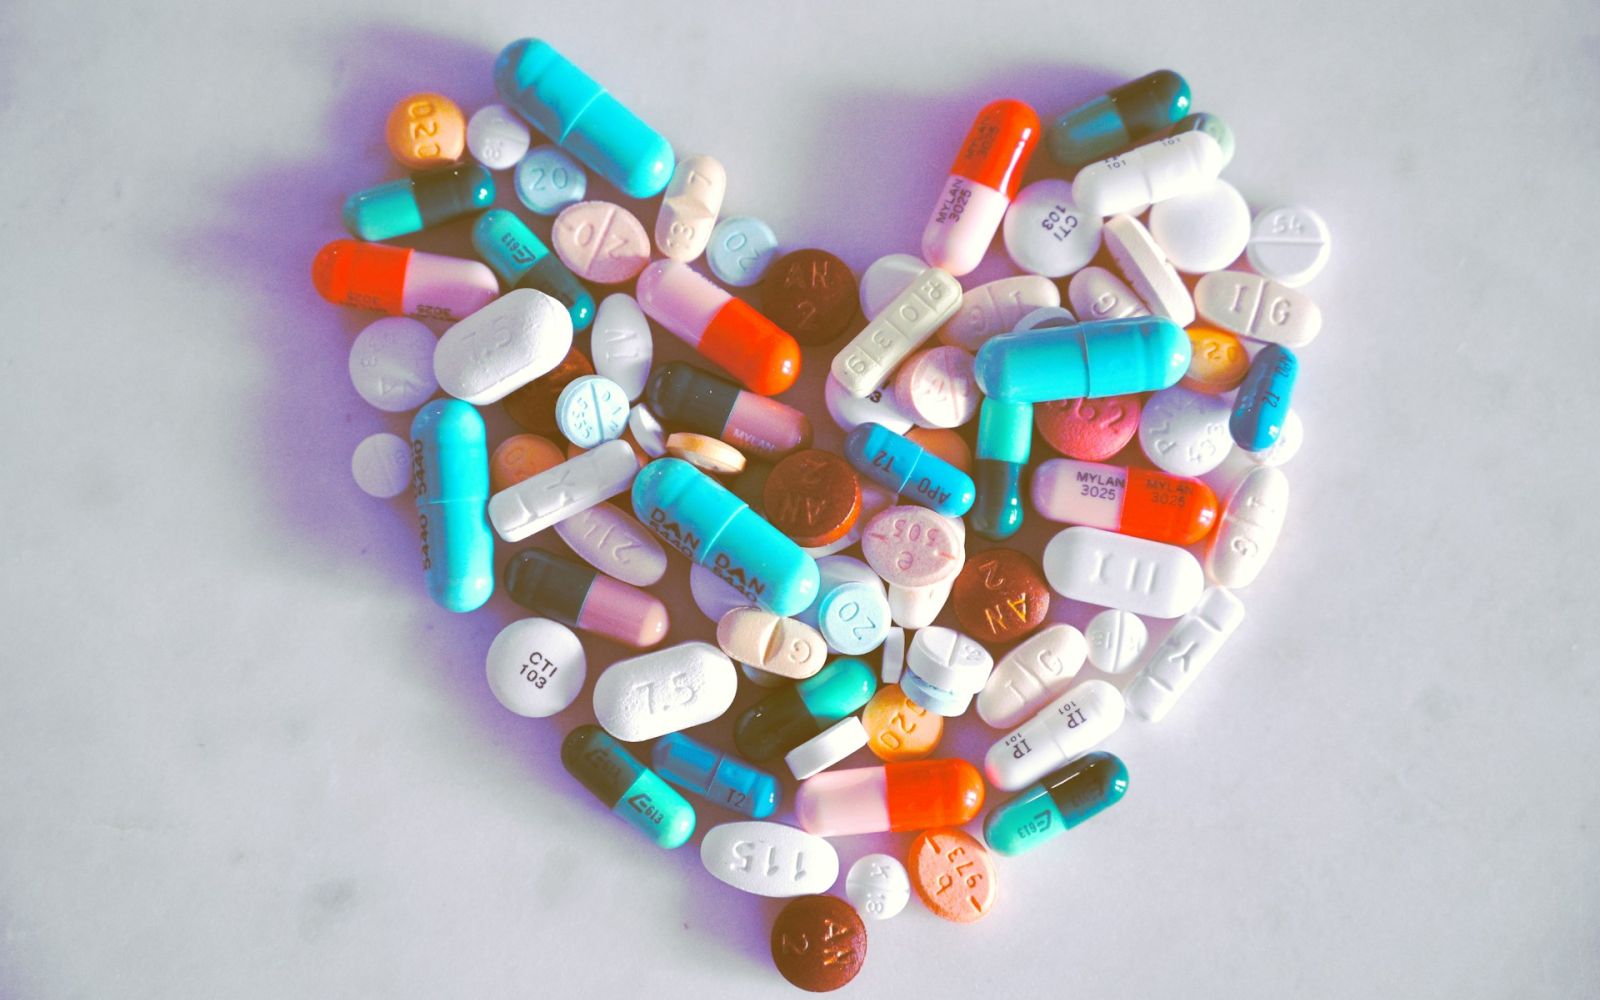 A compiled bunch of pills shaped into a heart